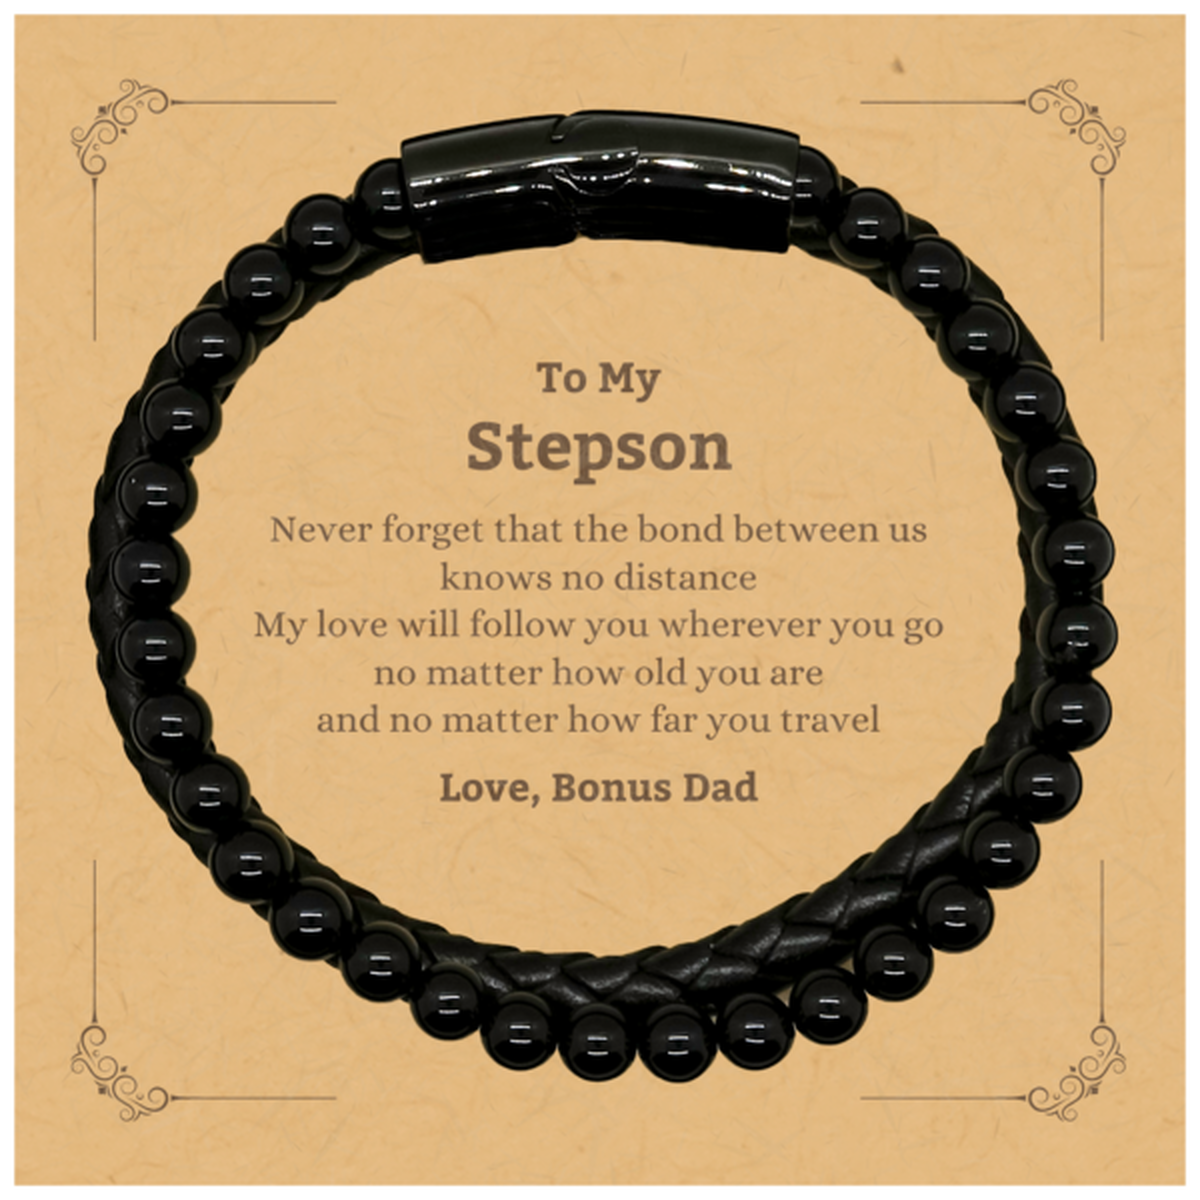 Stepson Birthday Gifts from Bonus Dad, Adjustable Stone Leather Bracelets for Stepson Christmas Graduation Unique Gifts Stepson Never forget that the bond between us knows no distance. Love, Bonus Dad